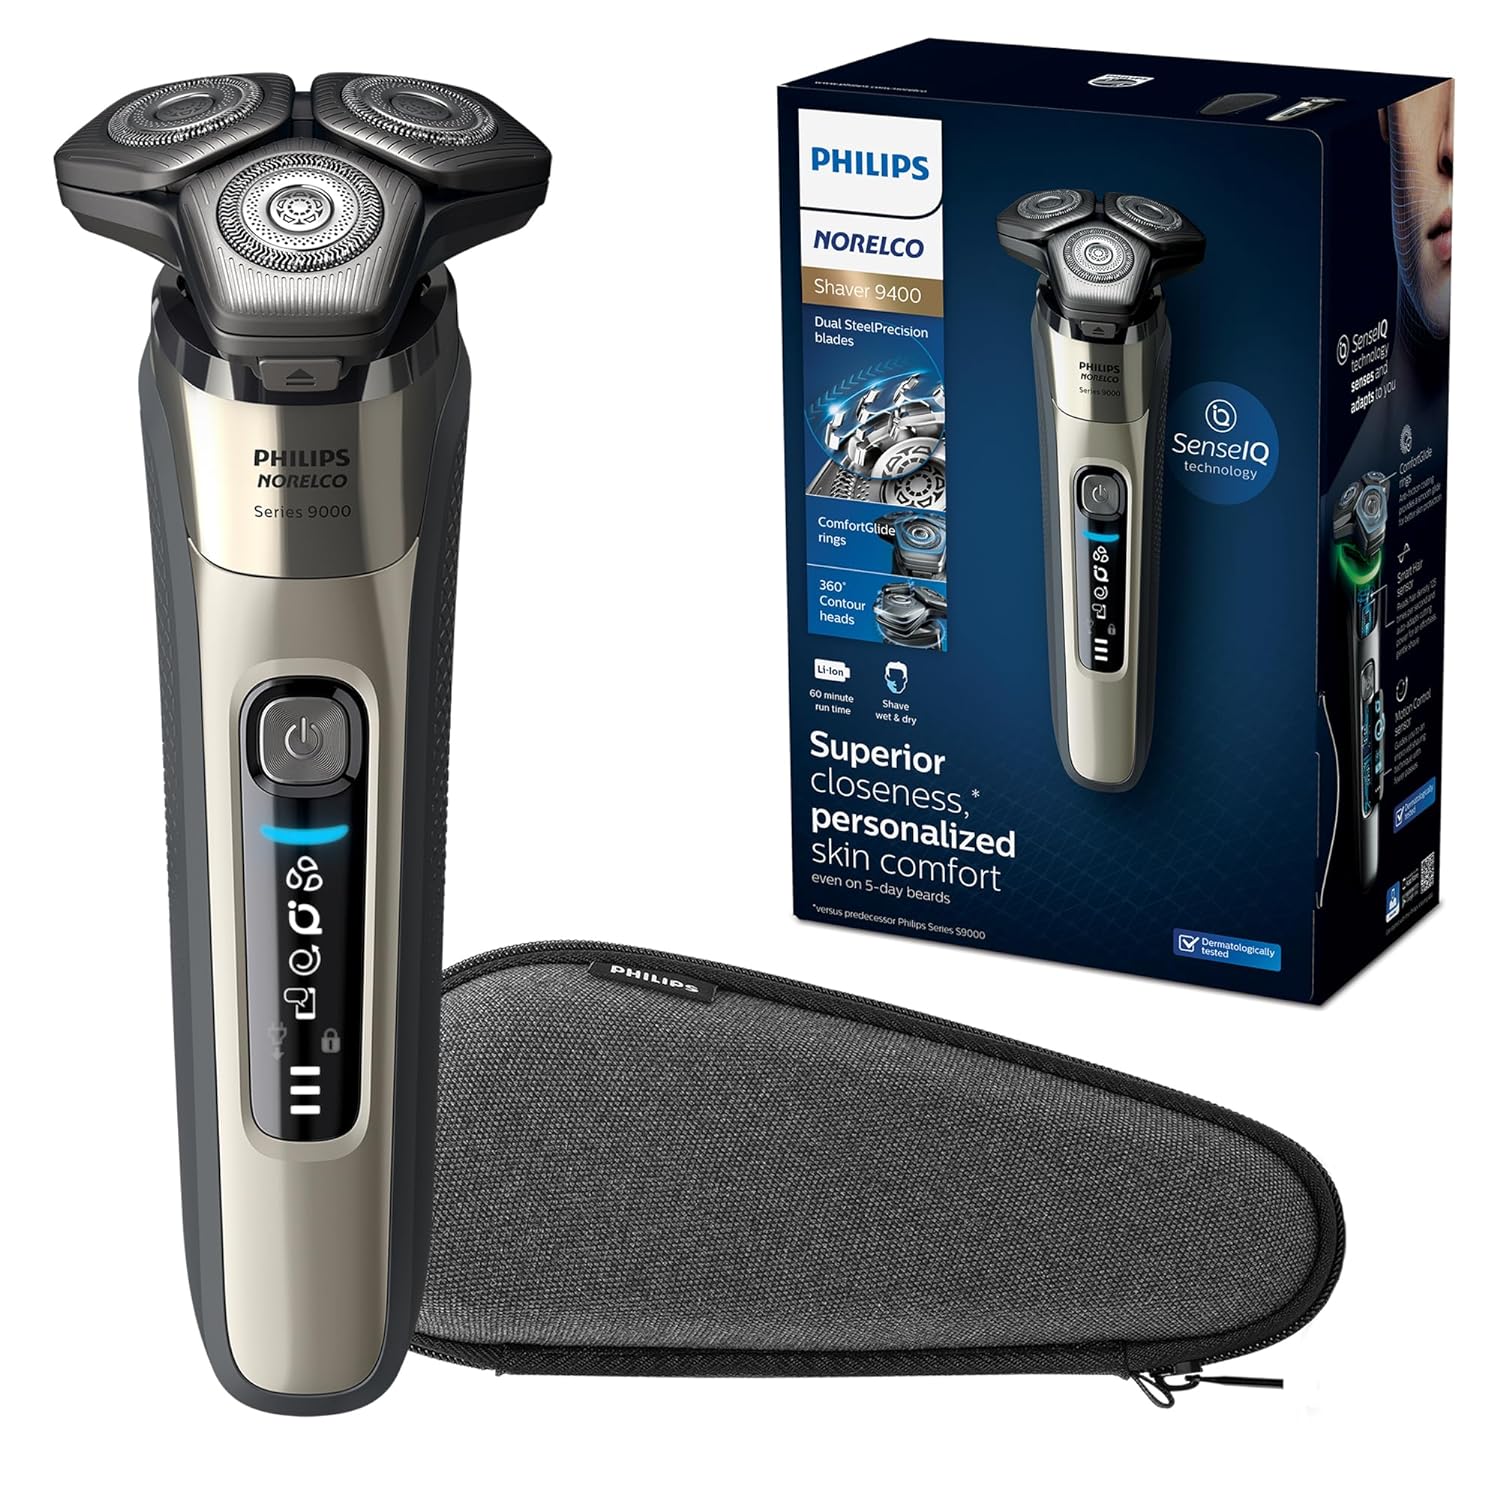 Philips Norelco 9400 Rechargeable Wet/Dry Electric Shaver 